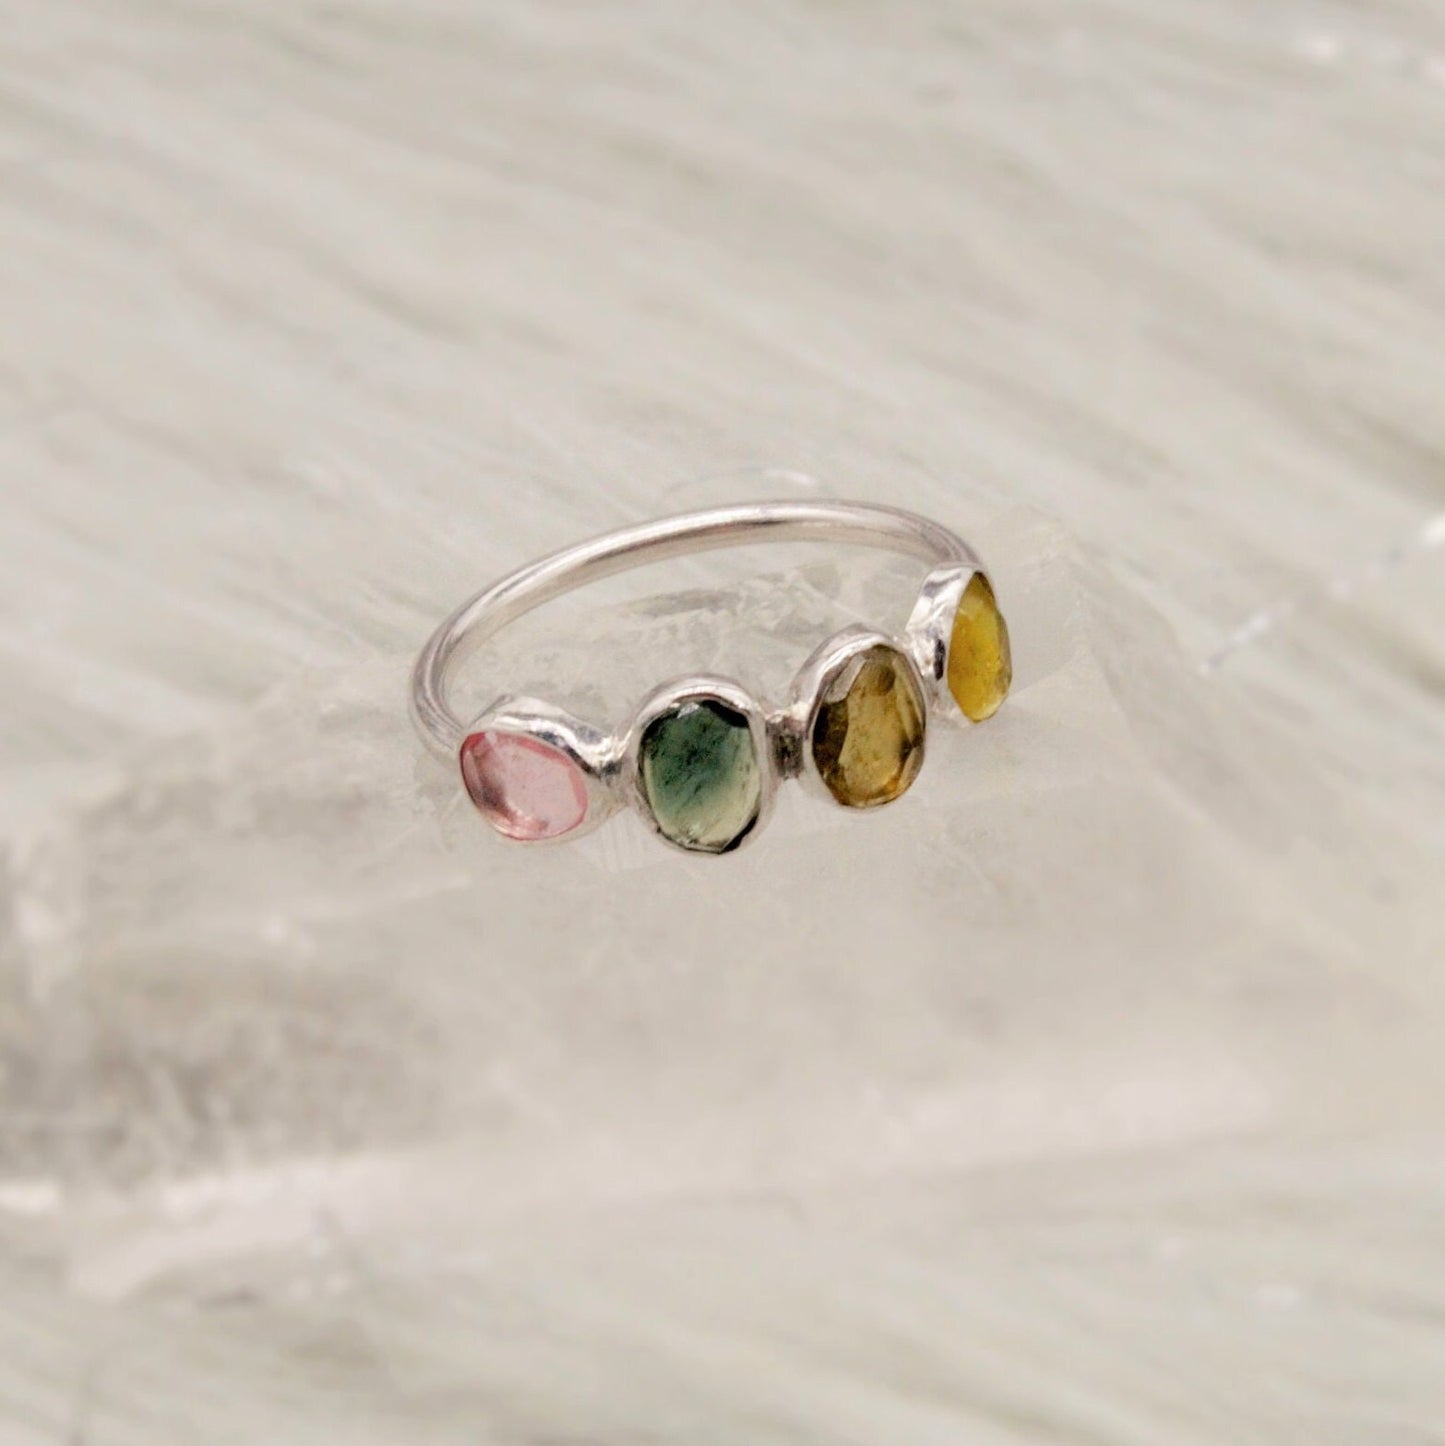 Pink Tourmaline Ring, Green Tourmaline, October Birthstone Jewelry, 925 Sterling Silver Ring, Rings For Women, Birthday Gift For Her